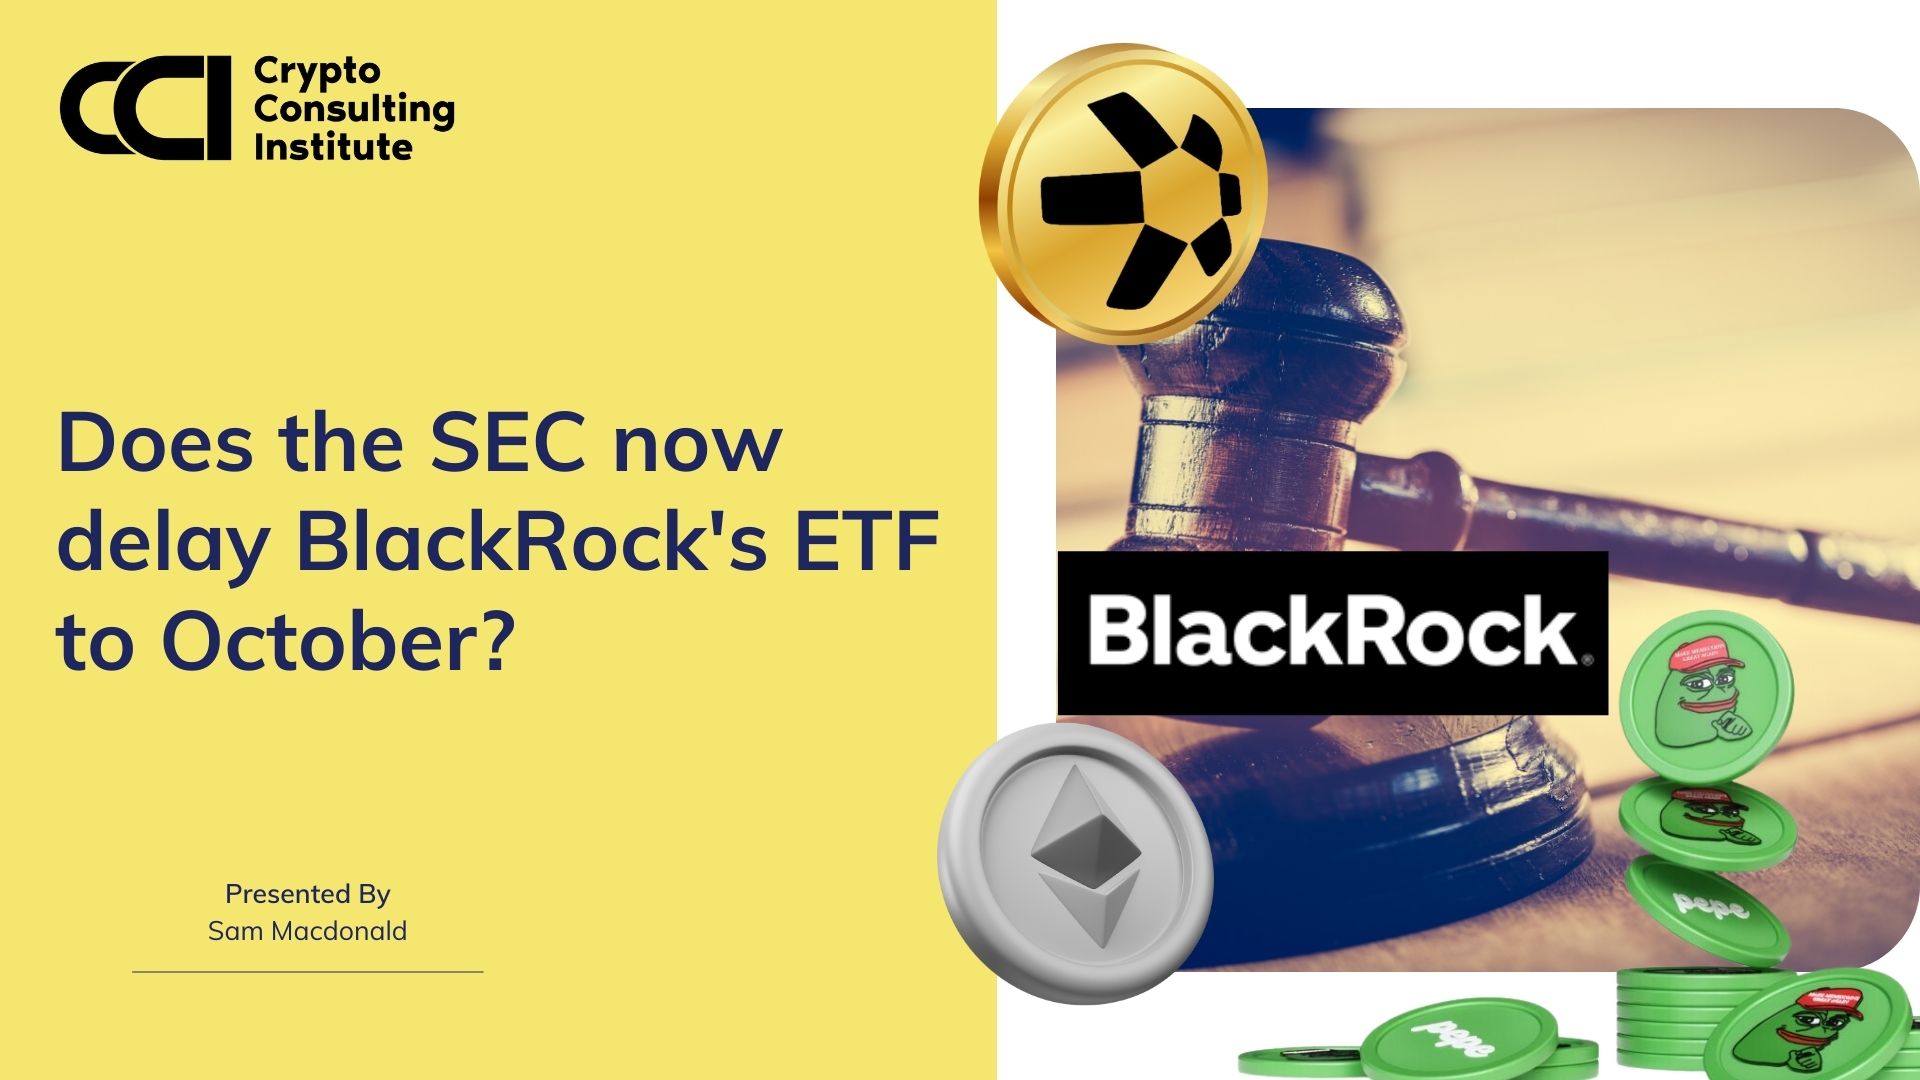 Does the SEC now delay BlackRock's ETF to October?